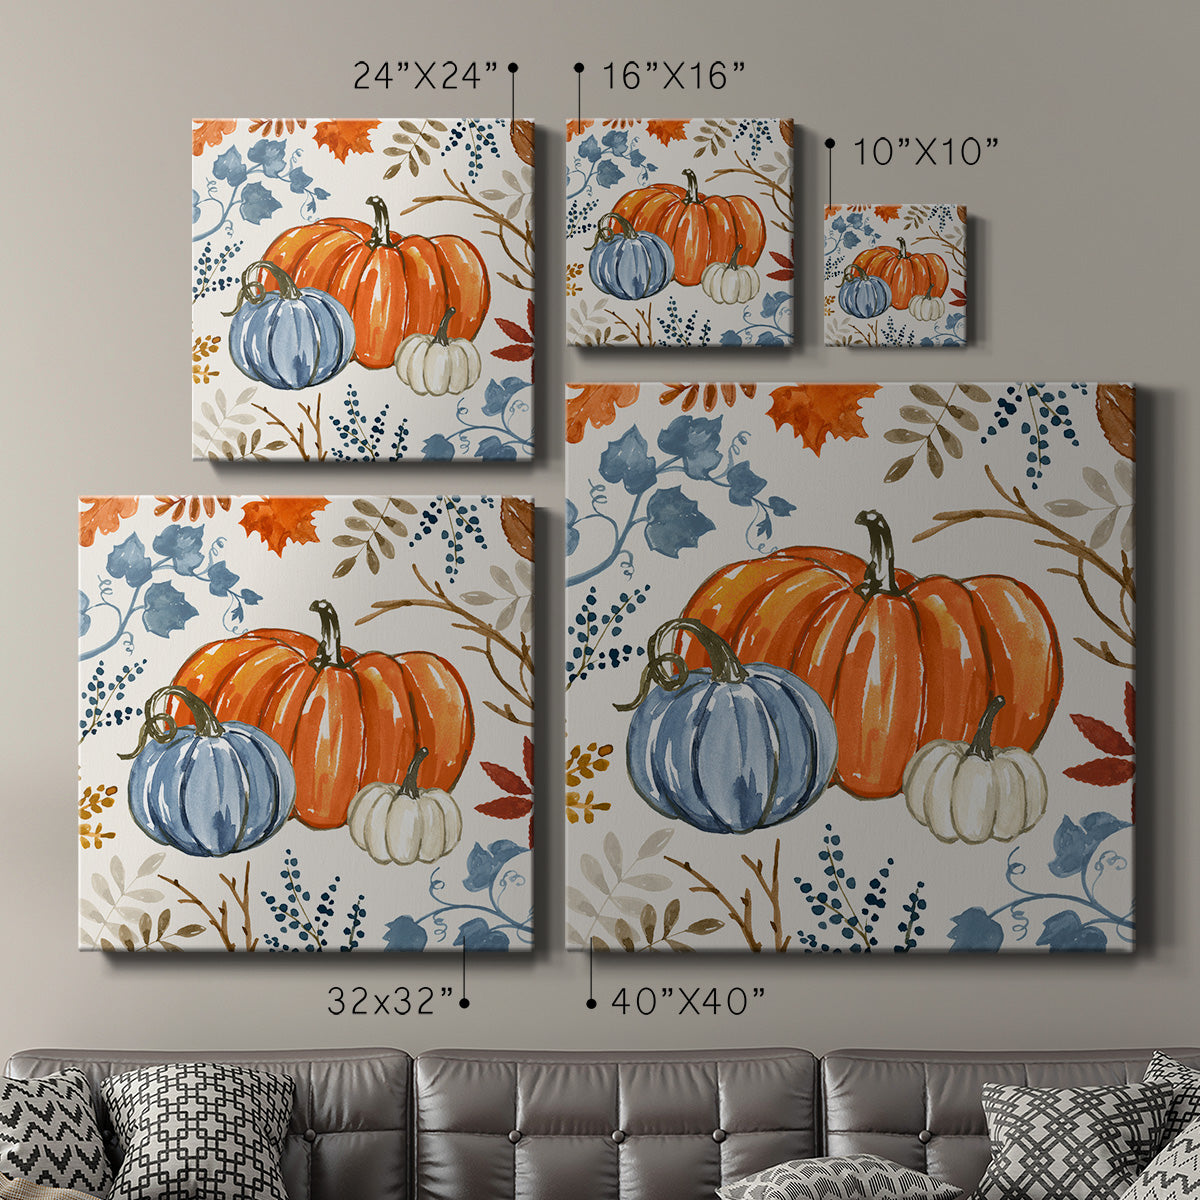 Autumn Pumpkin II -Premium Gallery Wrapped Canvas - Ready to Hang